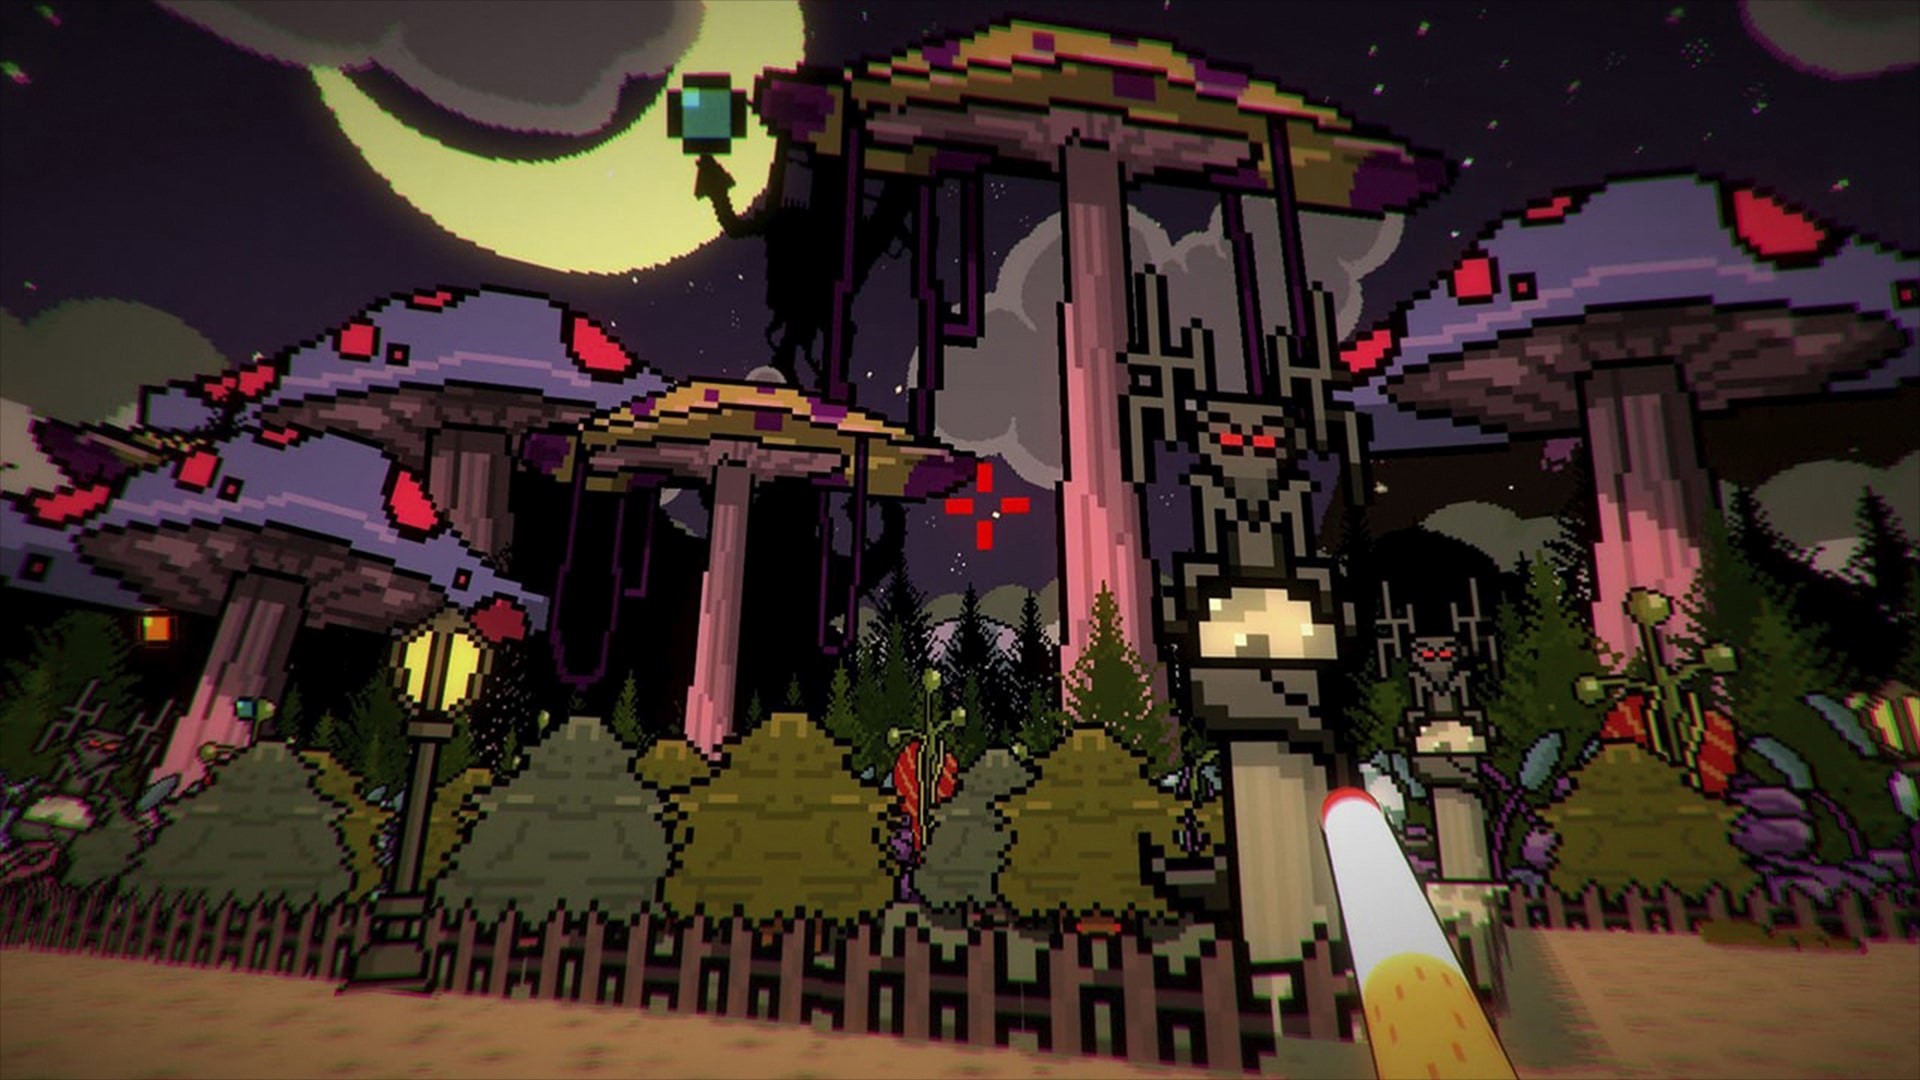 Baobabs Mausoleum Grindhouse Edition - Country of Woods and Creepy Tales screenshot